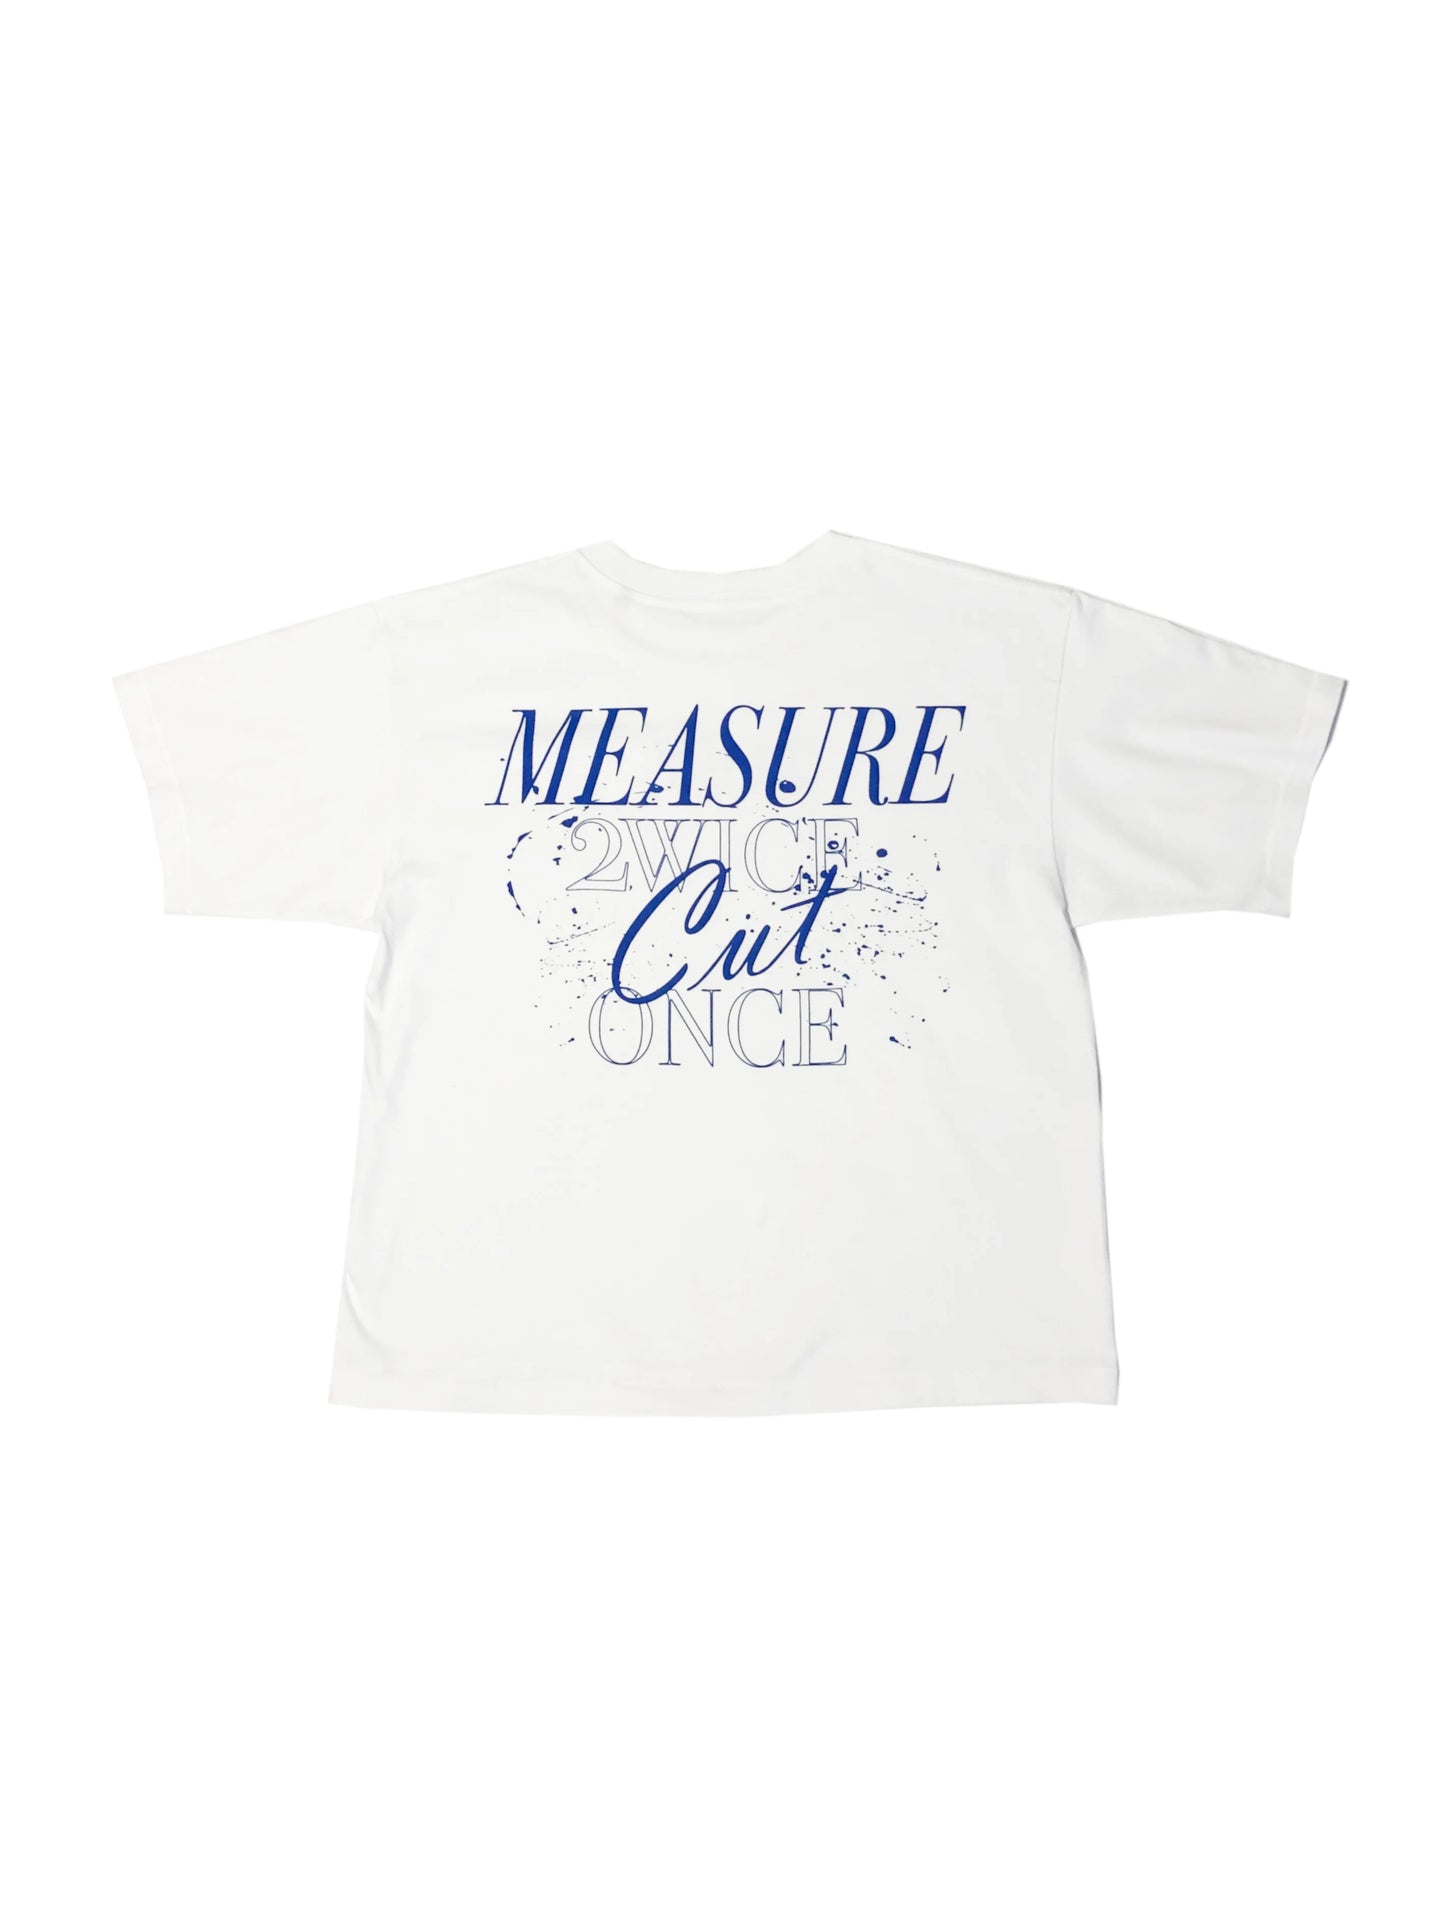 Measure 2WICE Cut Once T-Shirt